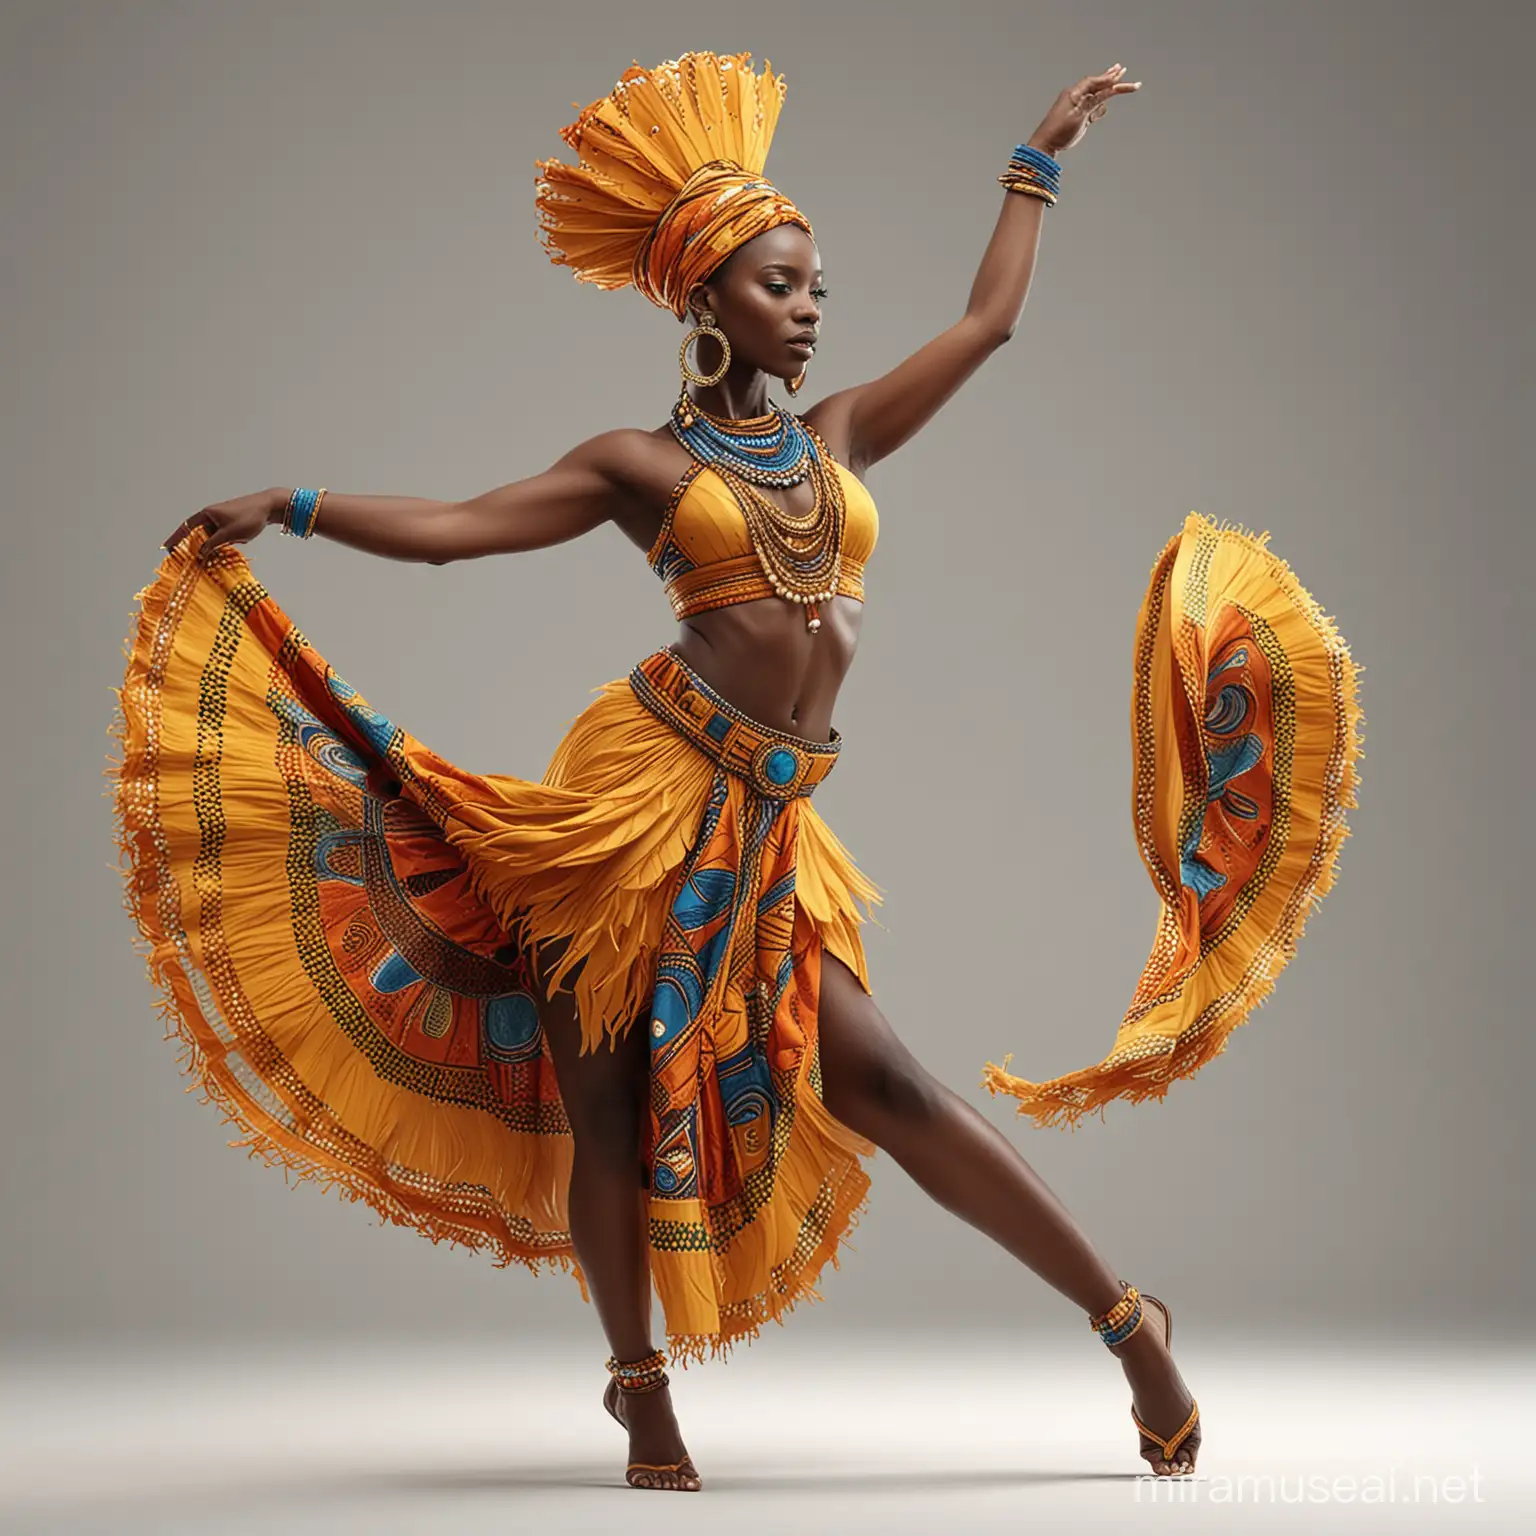 Create a lively and dynamic vector illustration of an African dancer in motion. The dancer should have a lean, muscular build, and the skin tone should be a rich, dark brown. The figure is captured in mid-dance, with one arm extended upward and the other gracefully positioned. The dancer's attire includes a colorful, traditional African costume with bright blue, orange, and yellow hues, accented with patterns and fringes that convey movement. The dancer should also be adorned with cultural accessories like beaded necklaces, bracelets, and a headband. The background should be plain white to emphasize the vibrancy and energy of the dancer's pose and costume. The artwork should exude a sense of rhythm and celebration of African dance heritage, depicted in a stylized, exaggerated form to showcase the beauty of the culture's artistic expression, 32k render, hyperrealistic, detailed.